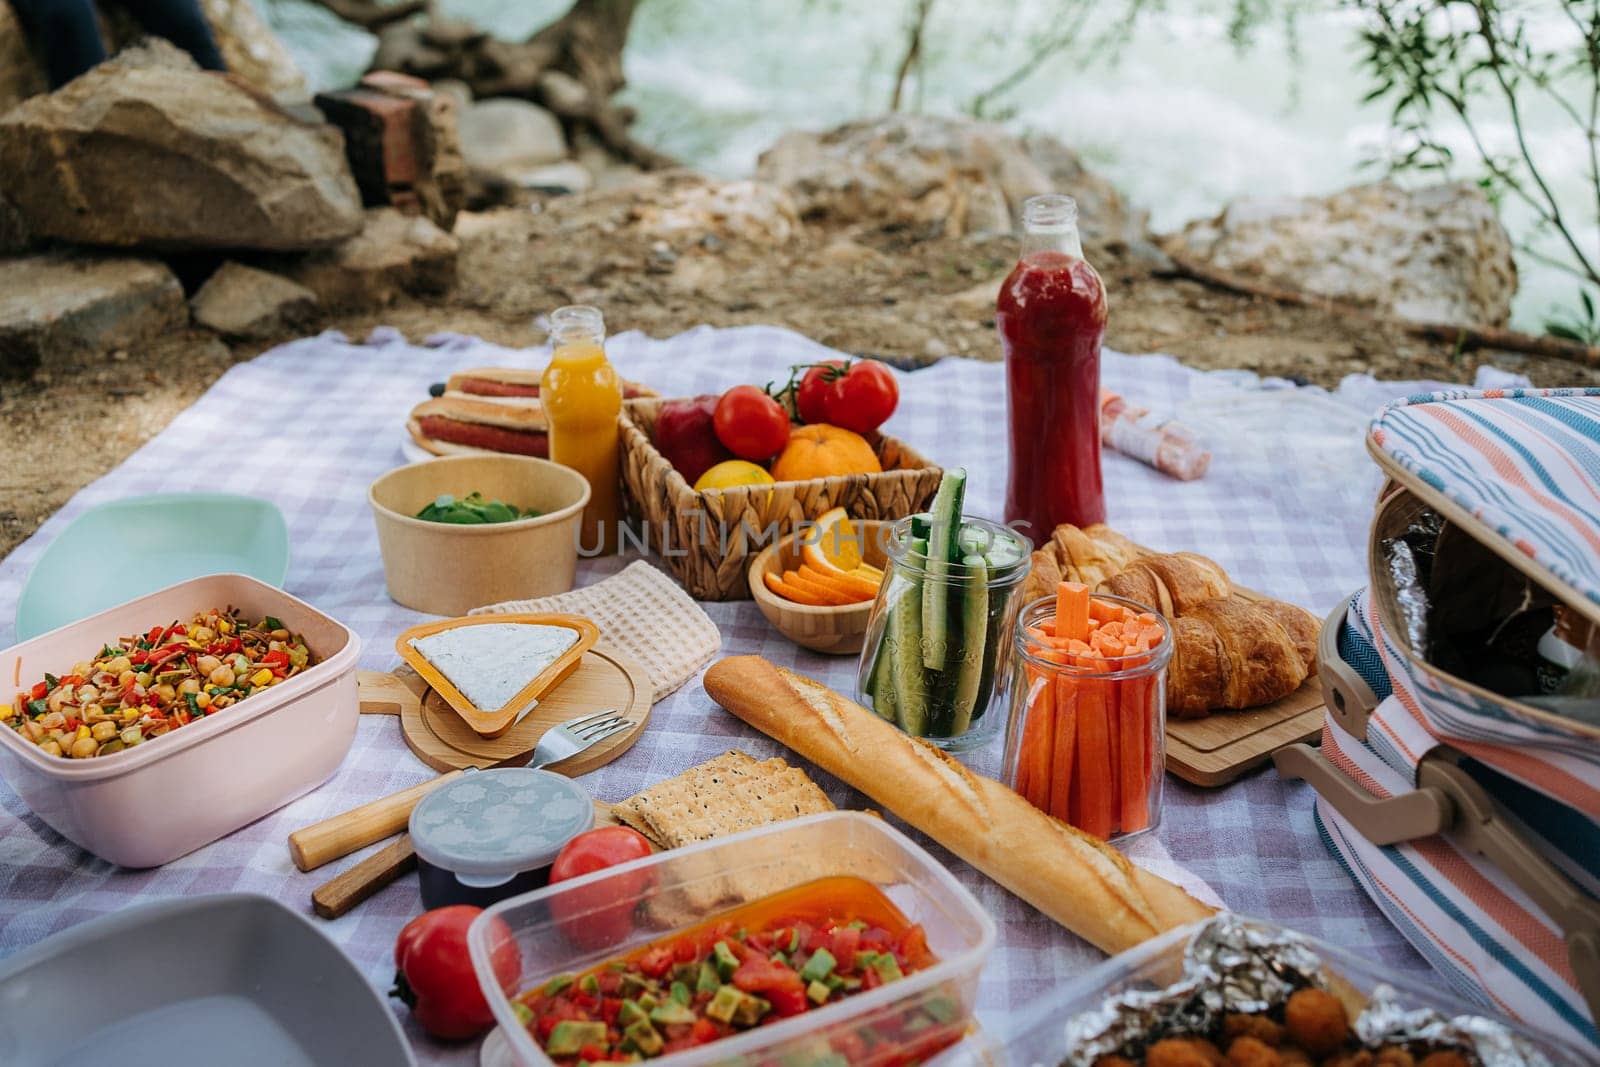 Picnic in the forest camping site with vegetables, juice, cheese, and croissants near mountain river. Fresh organic veggies surrounded with bread baguettes, salads by Ostanina